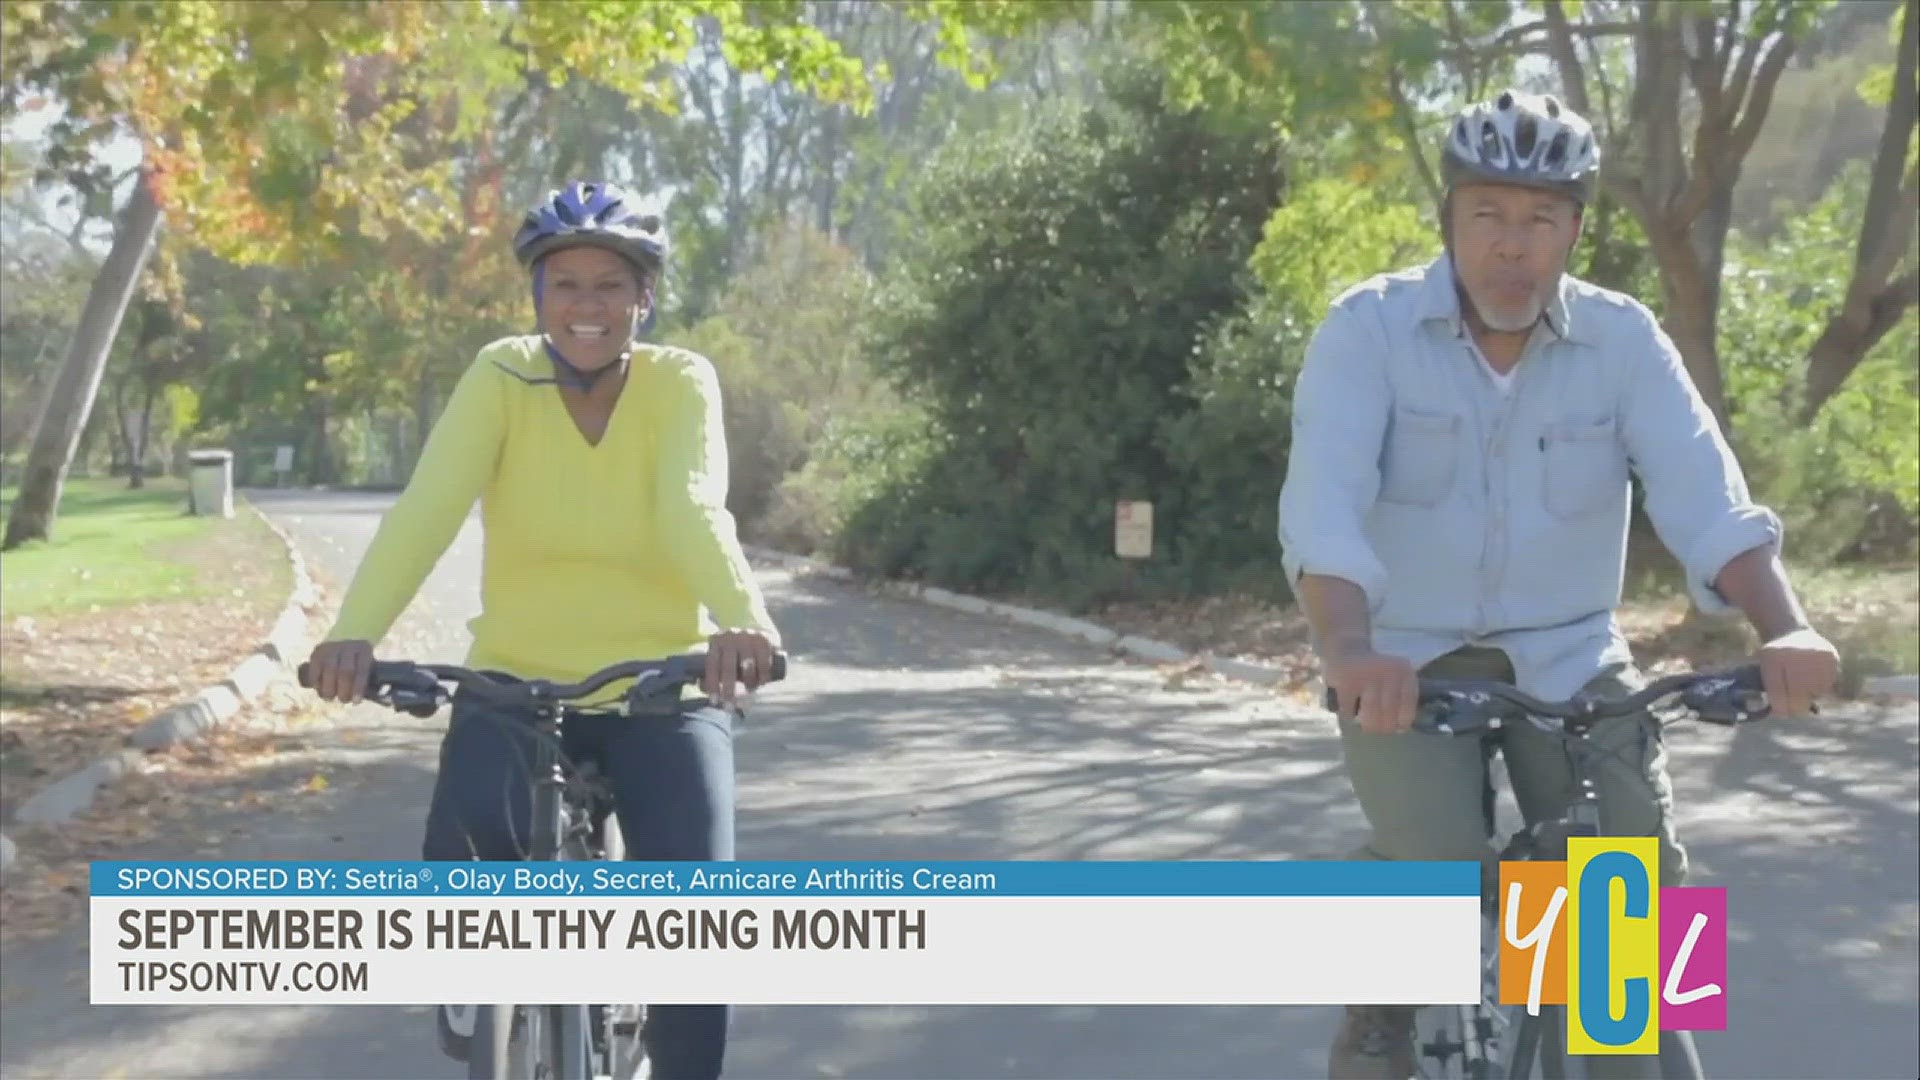 National Healthy Aging Month is a time for people to rethink their health goals. This segment is paid for by Setria®, Olay Body, Secret, & Arnicare Arthritis Cream.